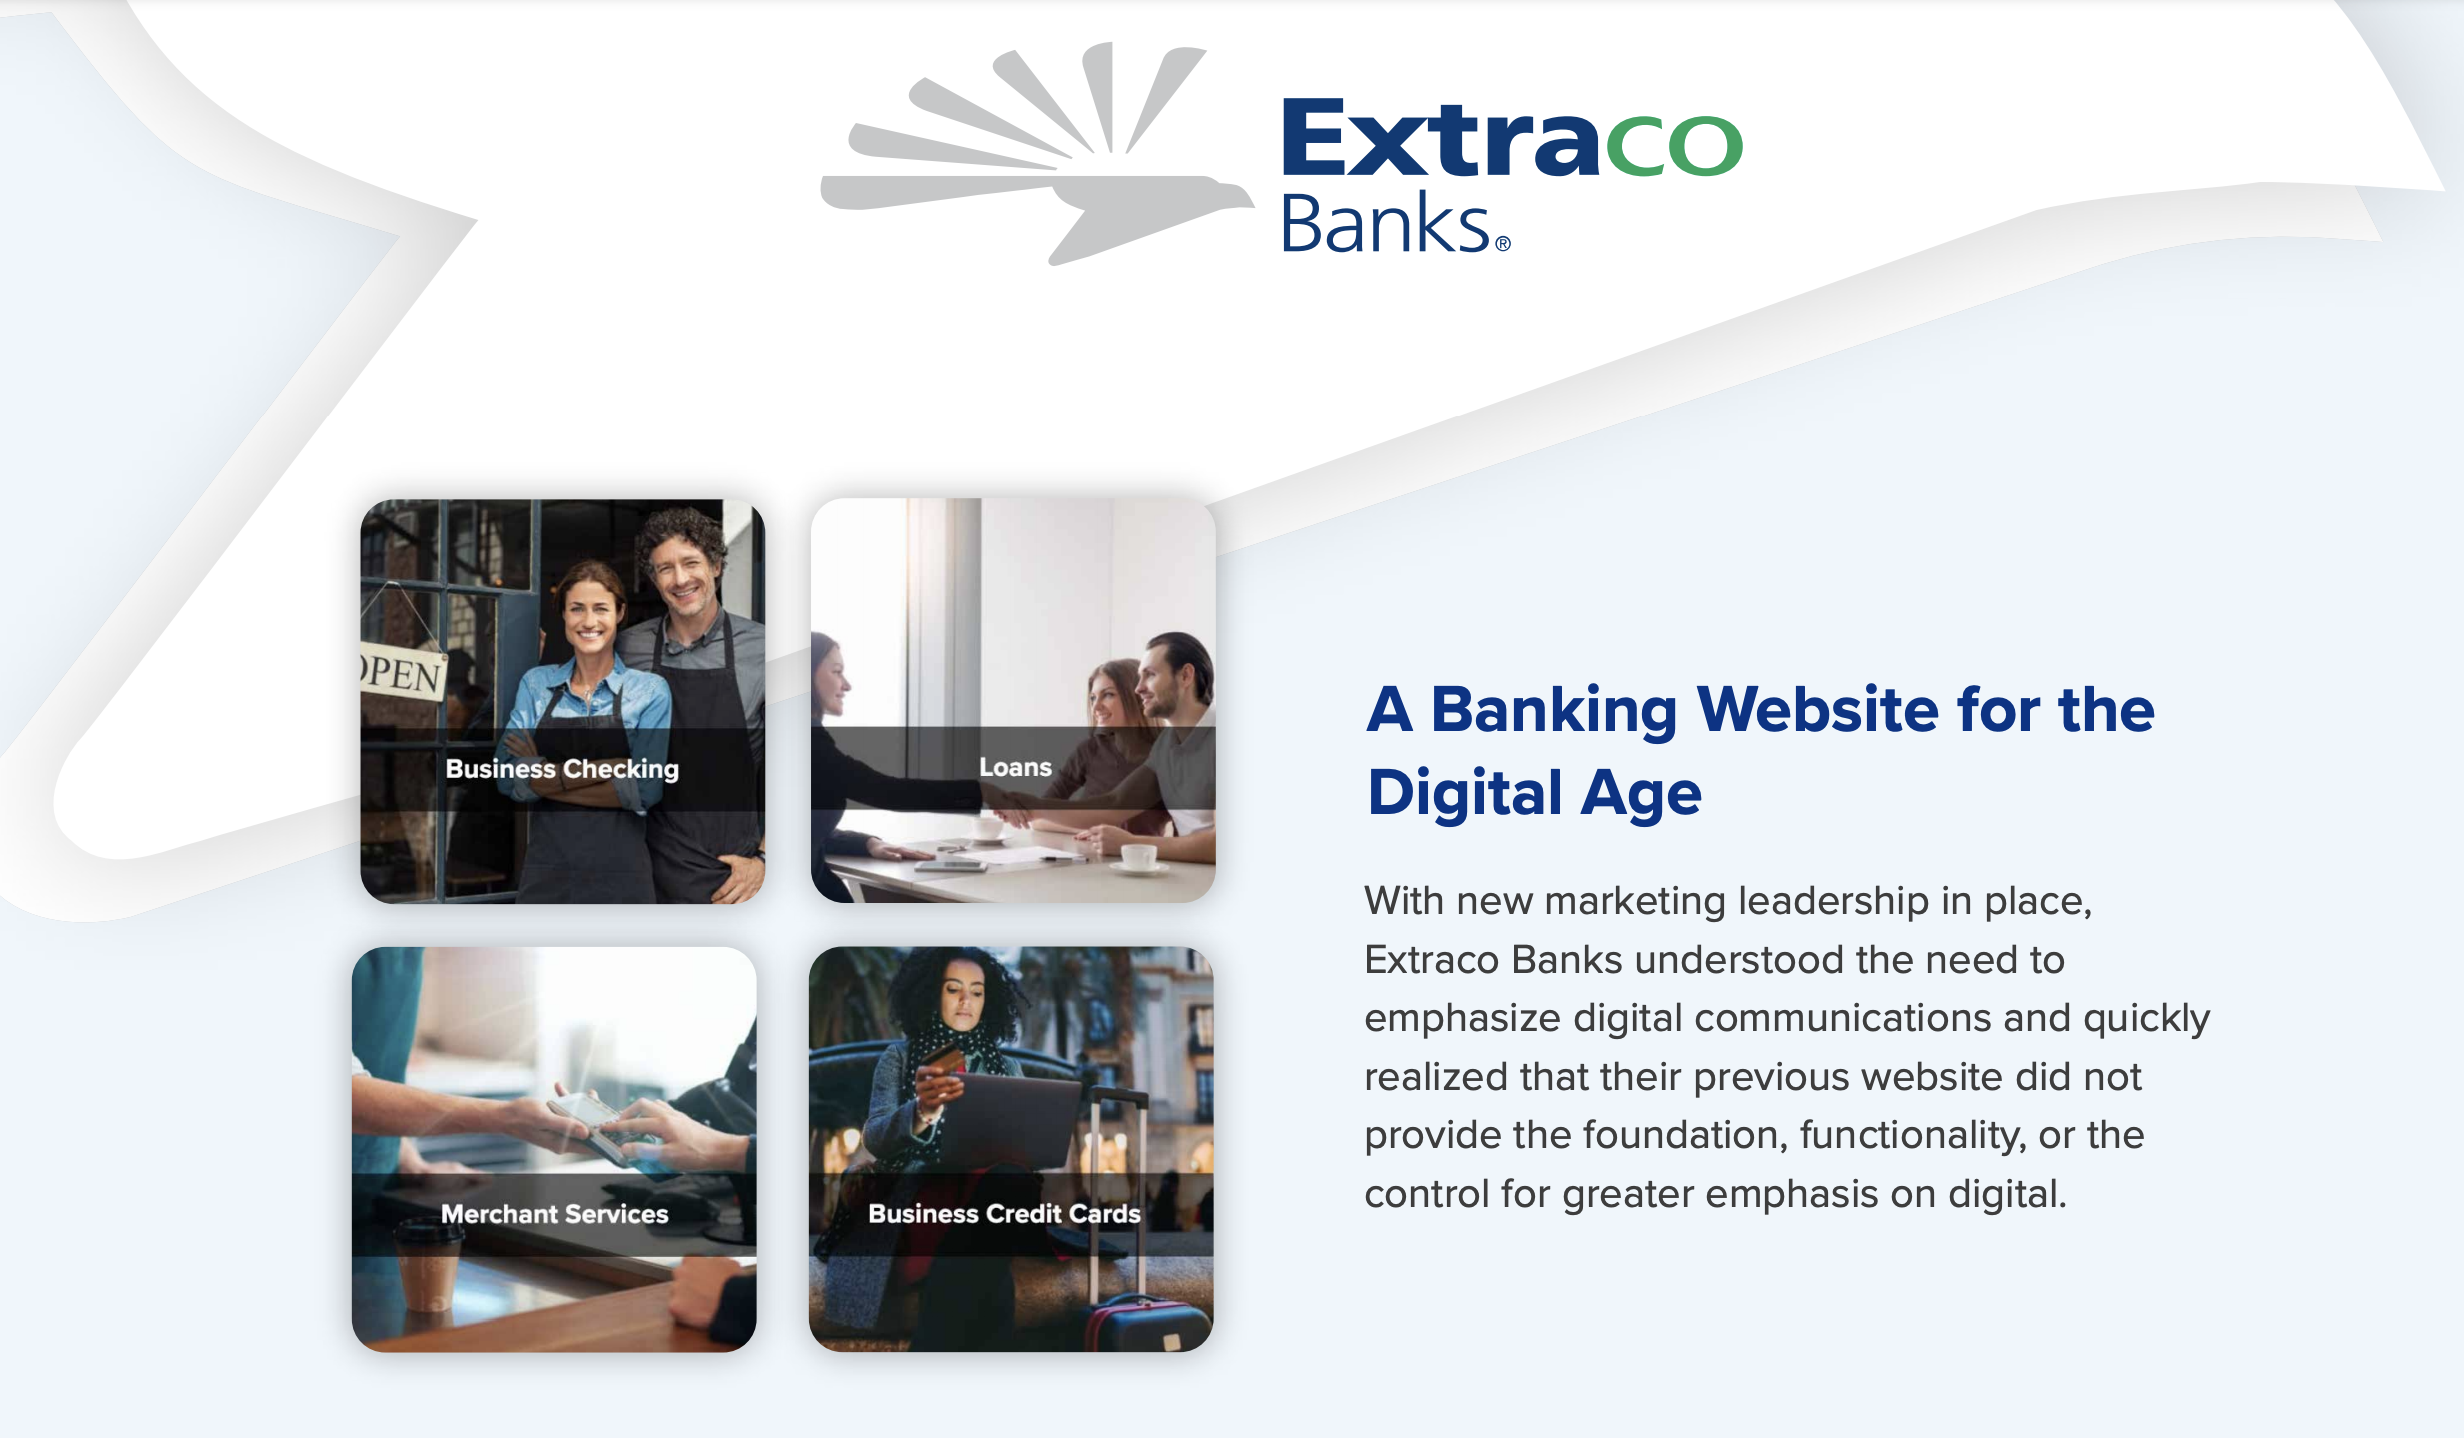 Vega Digital Awards Winner - Extraco Banks' Agile Approach to Digital Engagement, Unleashed Technologies